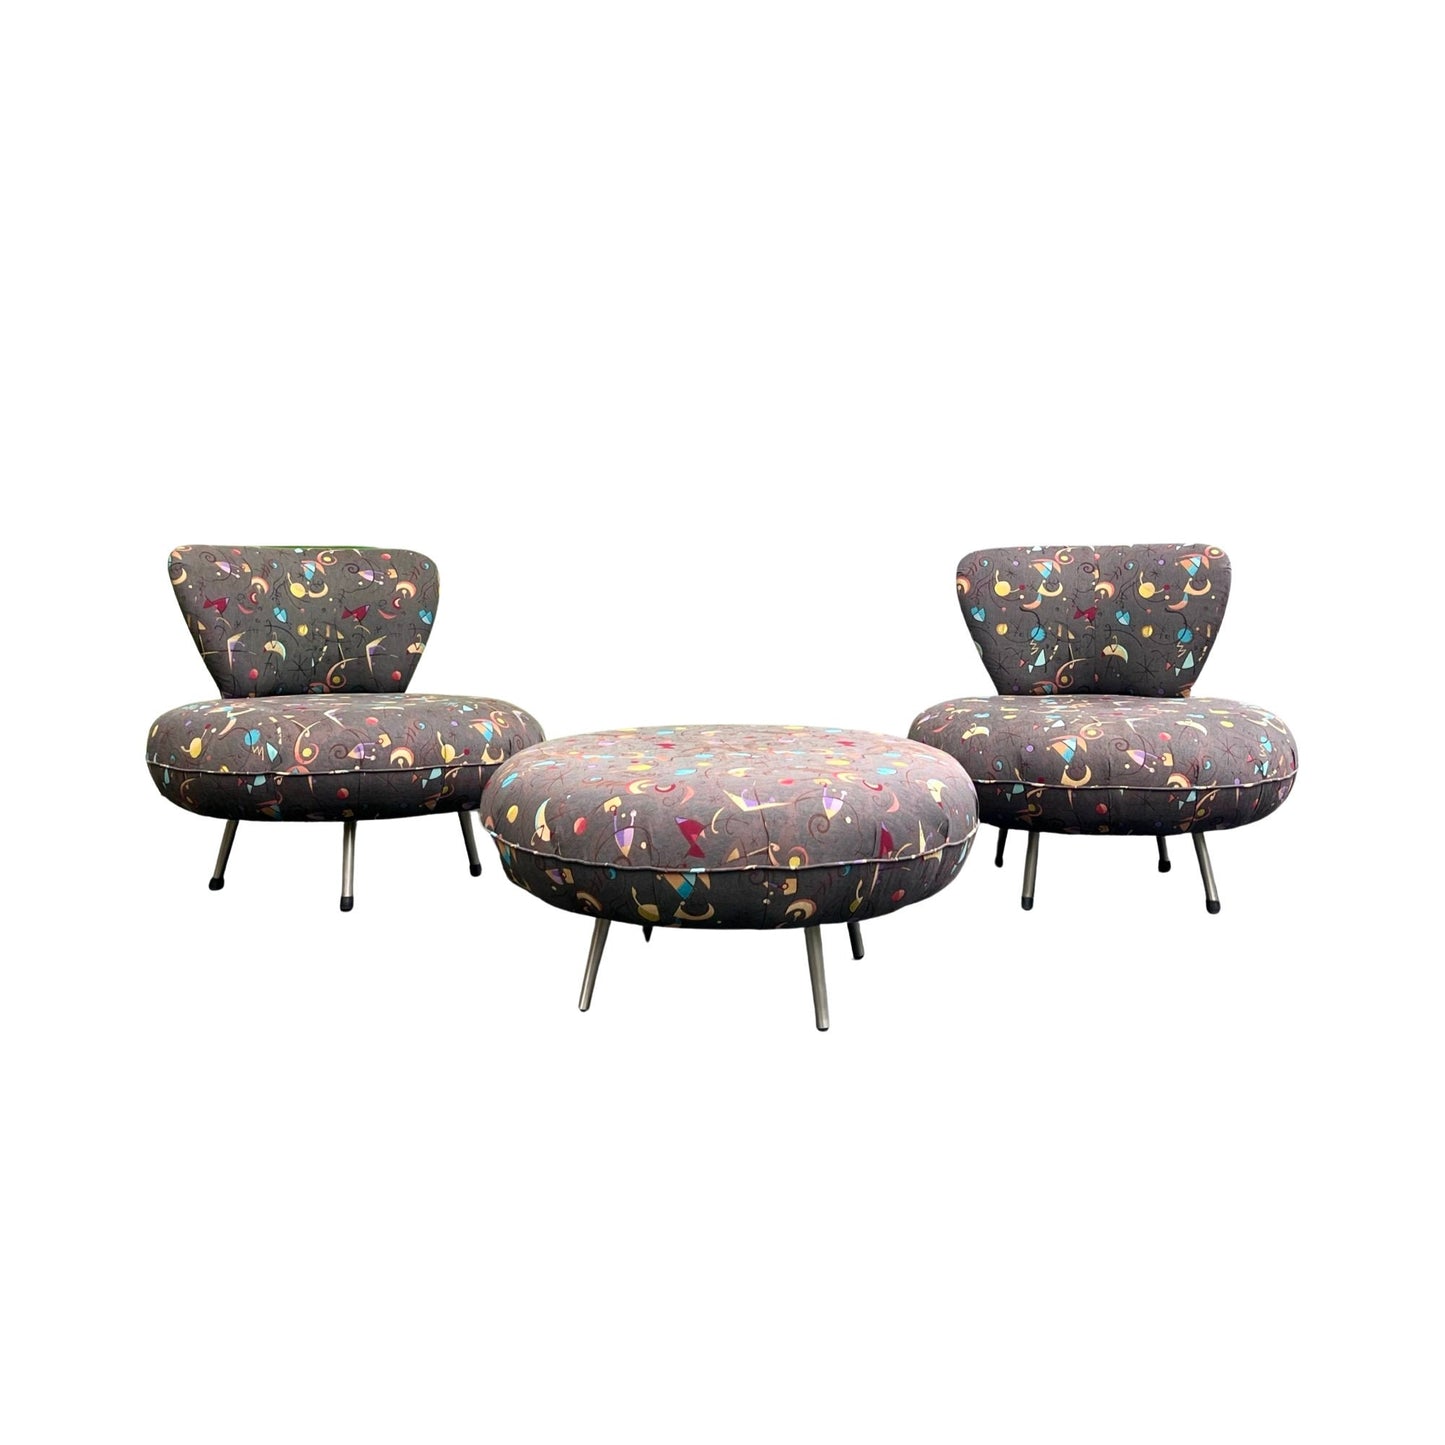 Vintage Atomic-style swivel chairs and ottoman by Carson's